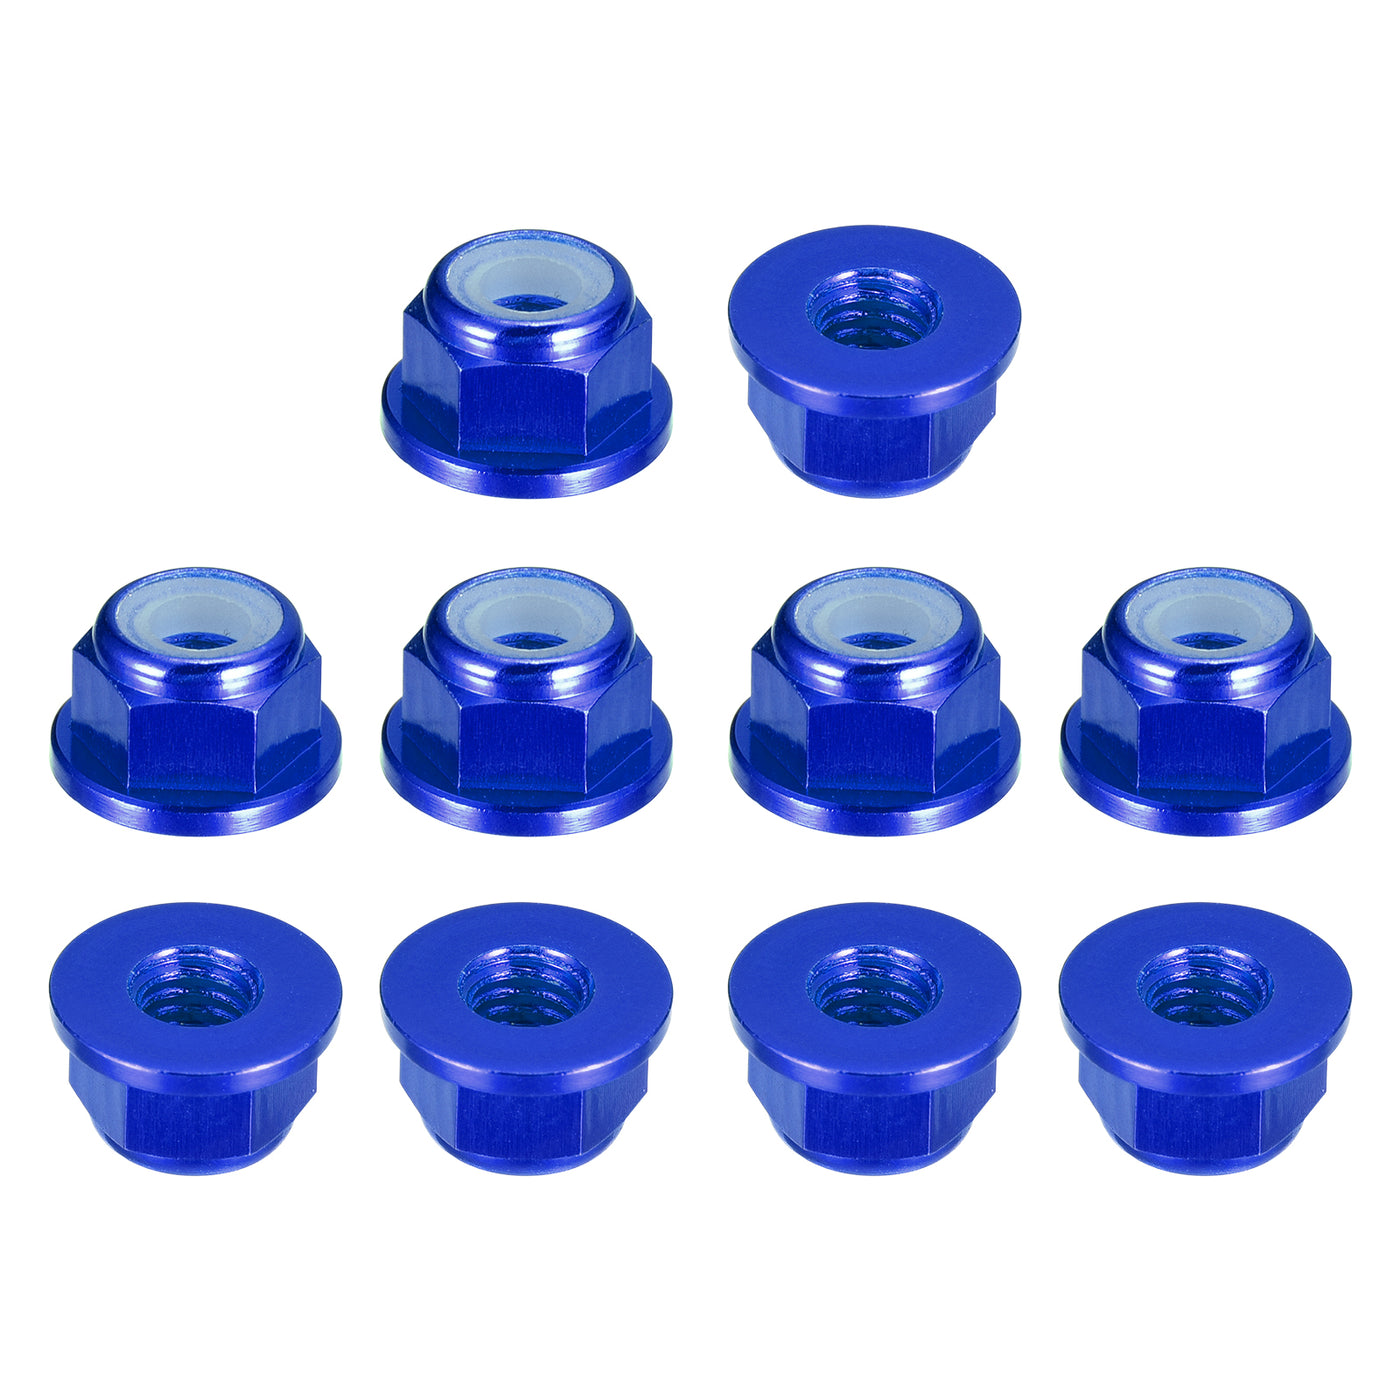 uxcell Uxcell Nylon Insert Hex Lock Nuts, 10pcs - M4 x 0.7mm Aluminum Alloy Self-Locking Nut, Anodizing Flange Lock Nut for Fasteners (Sapphire Blue)